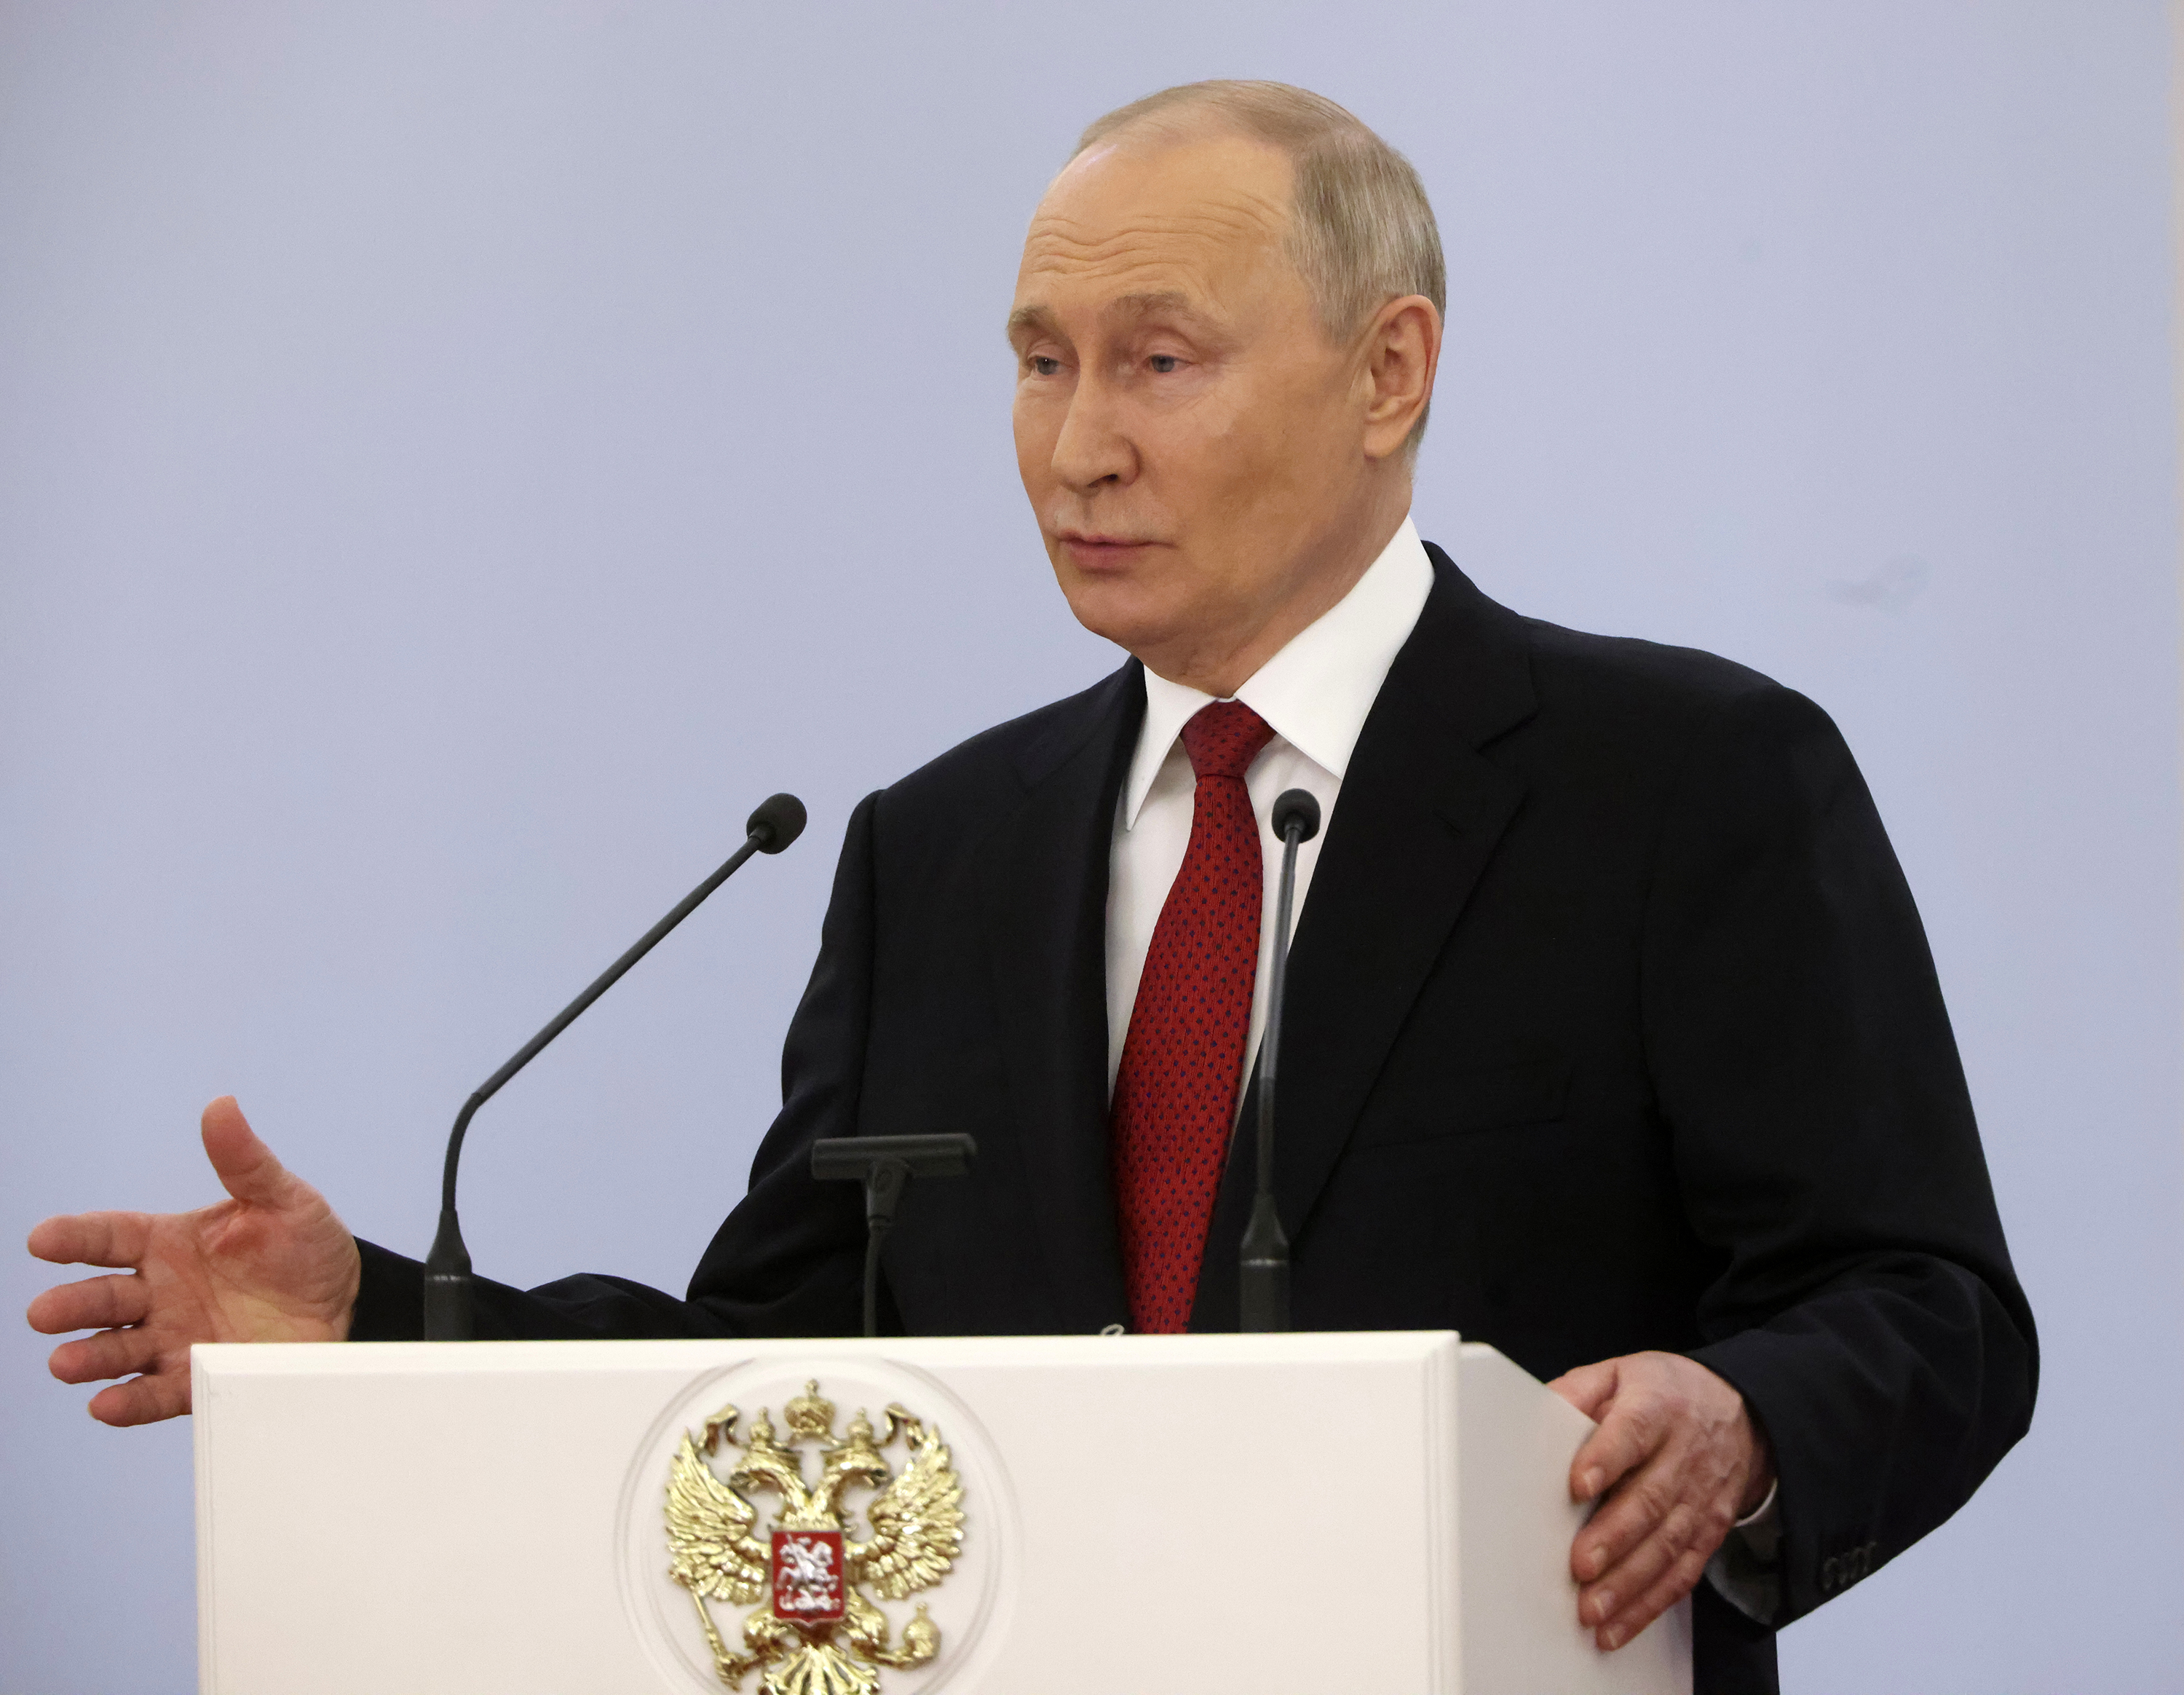 Russian President Vladimir Putin during his speech at the Grand Kremlin Palace, on June 12, in Moscow, Russia.